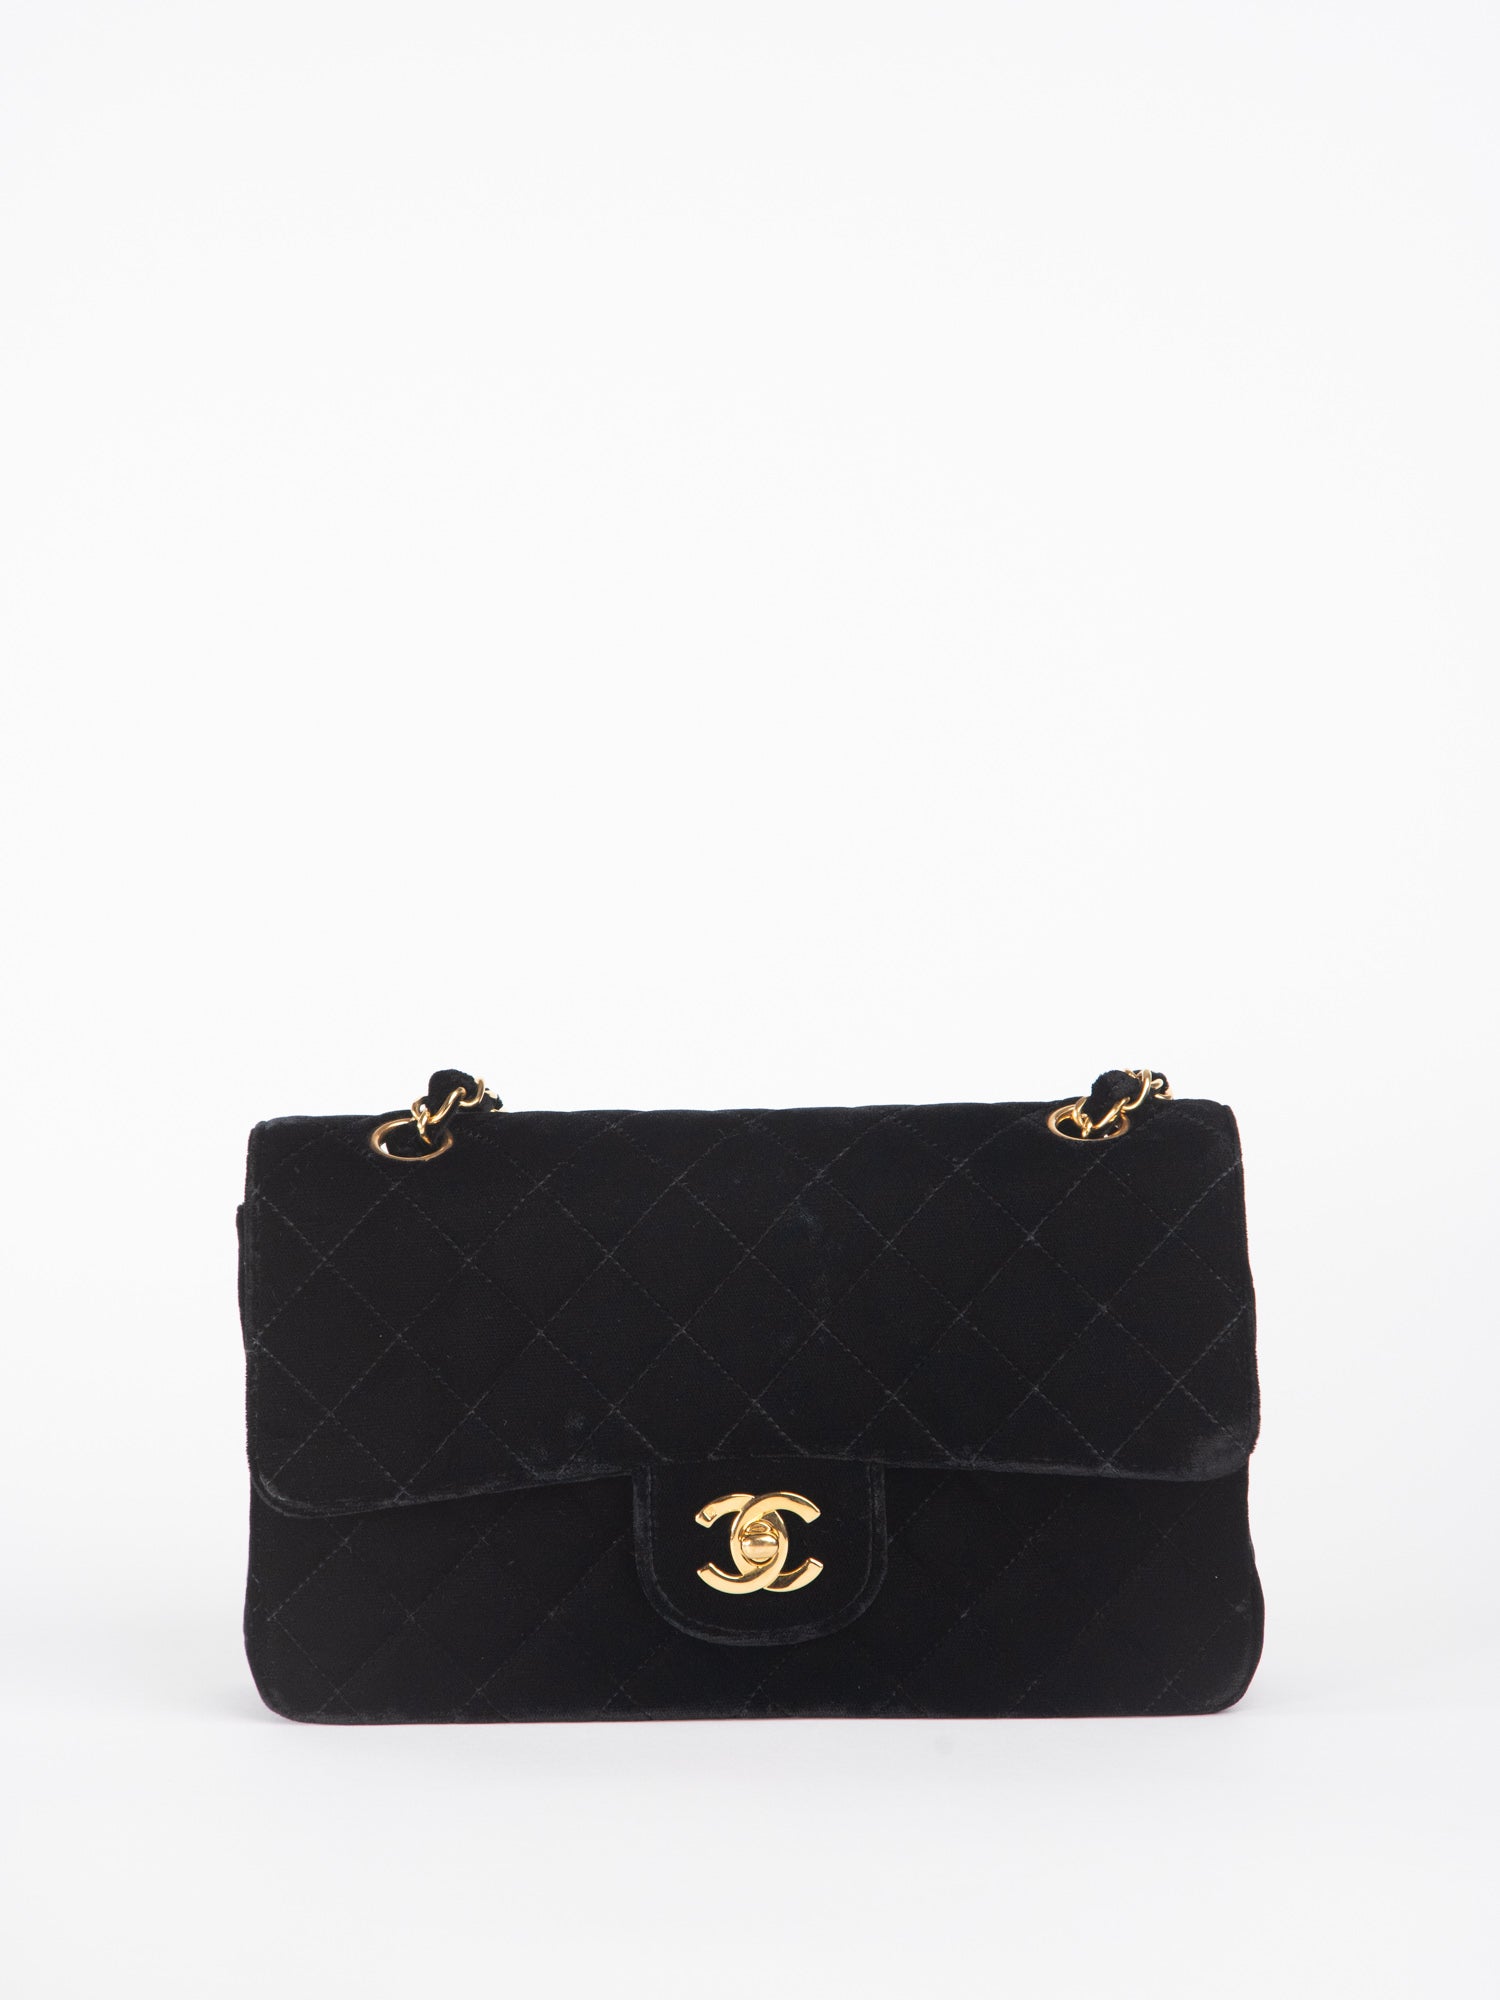 Chanel Vintage Square Classic Single Flap Bag Quilted Suede Mini